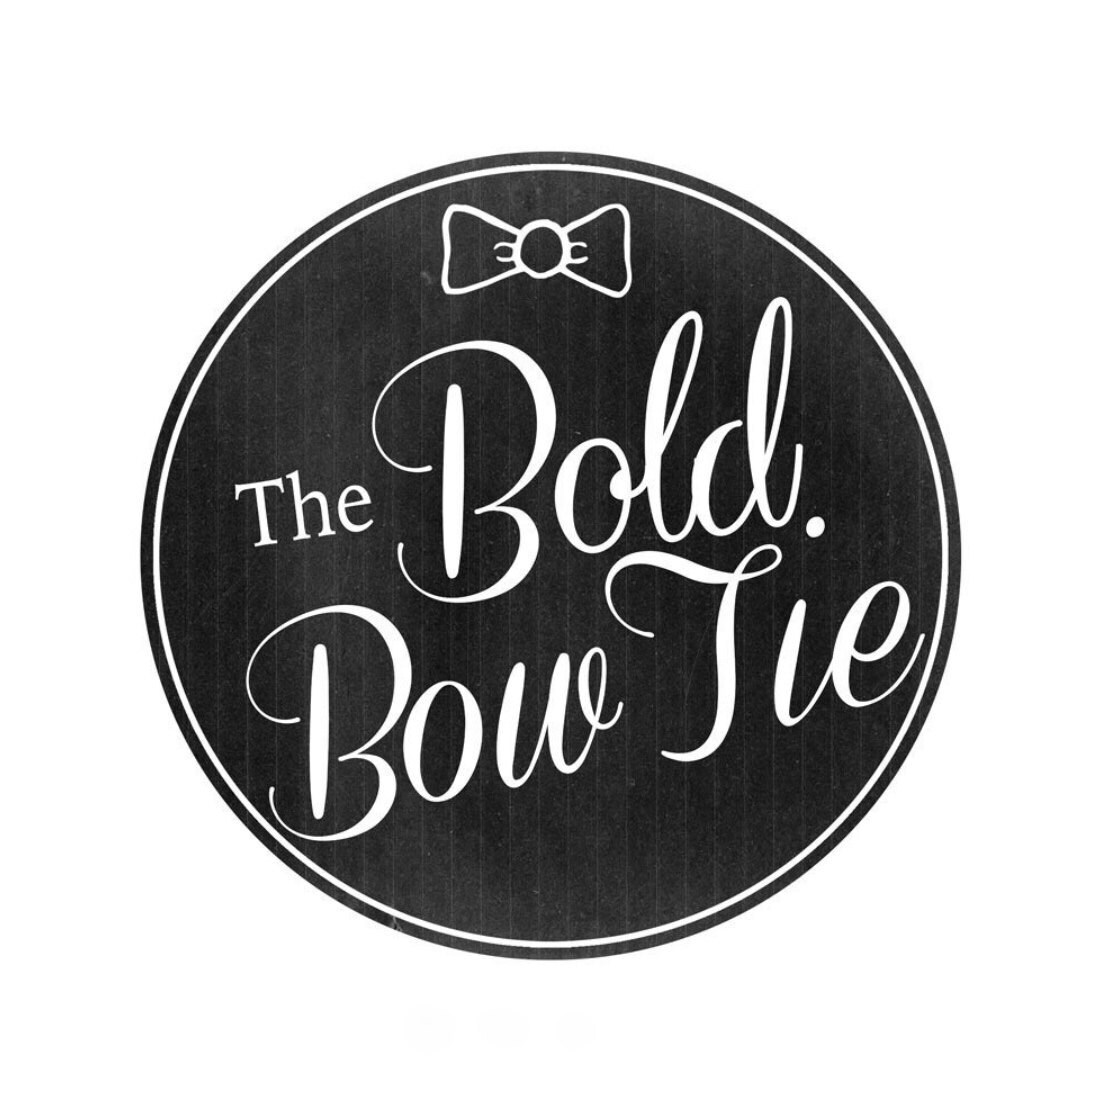 The Bold Bow Tie.